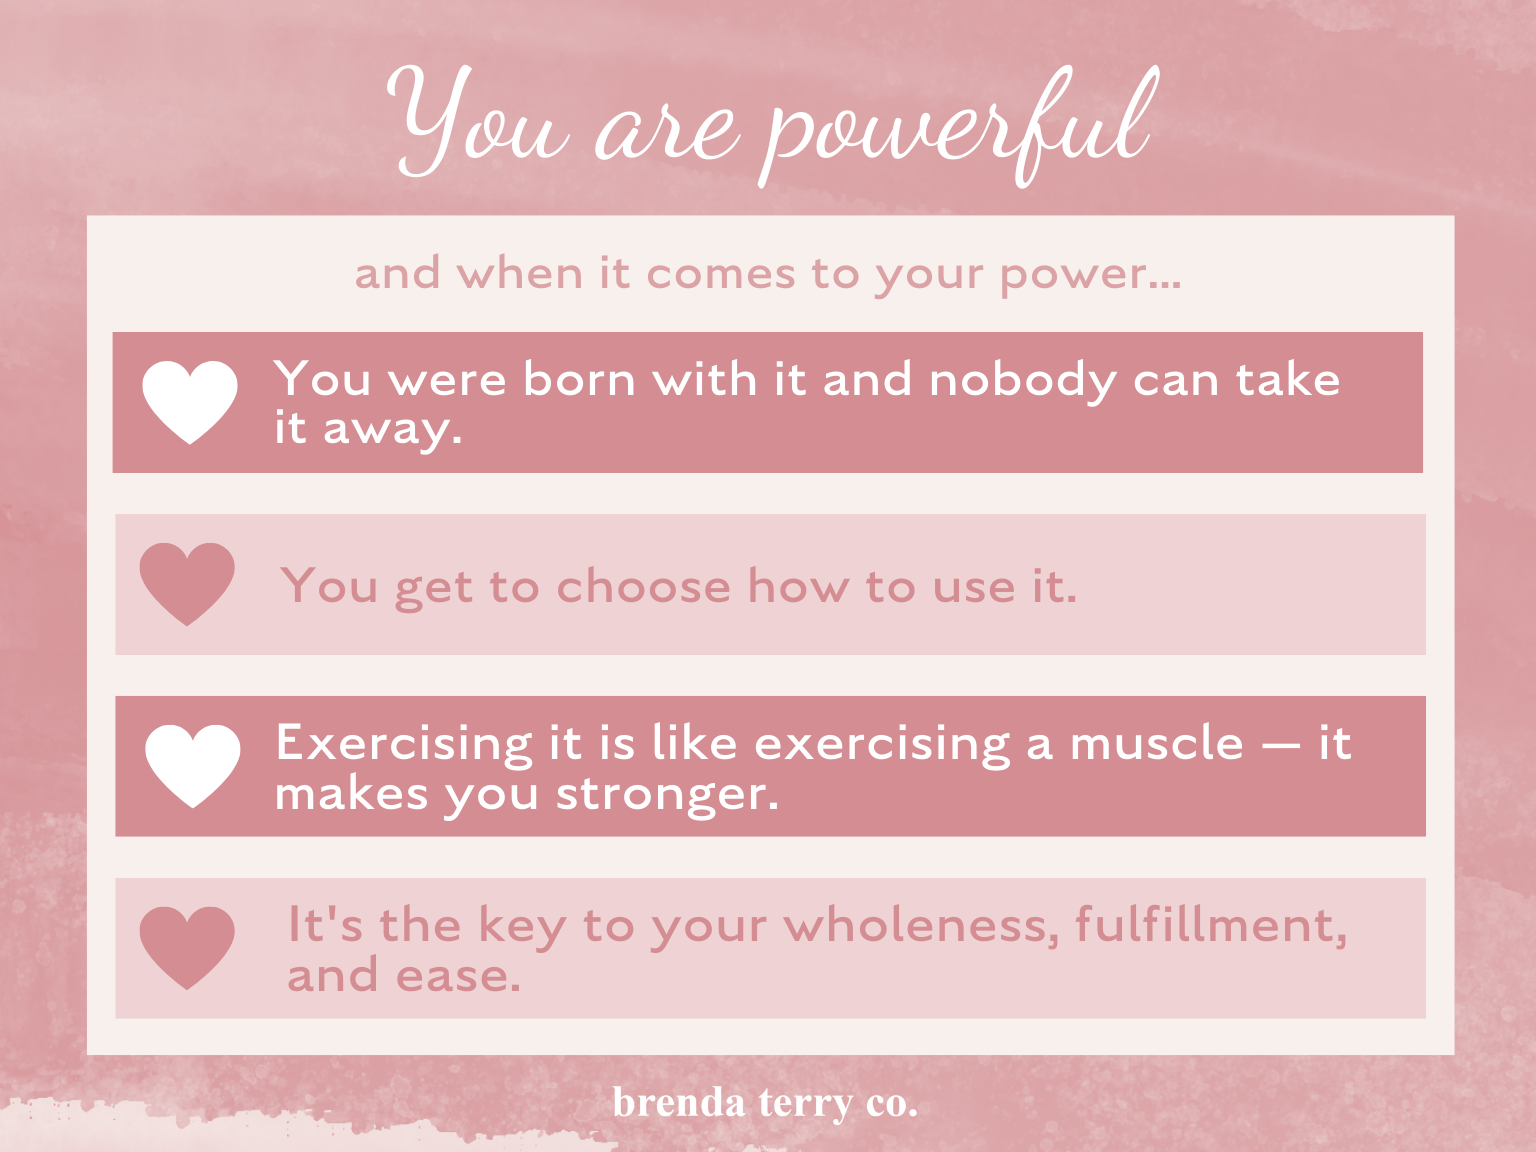 You are powerful. 5 things to know about what is personal power